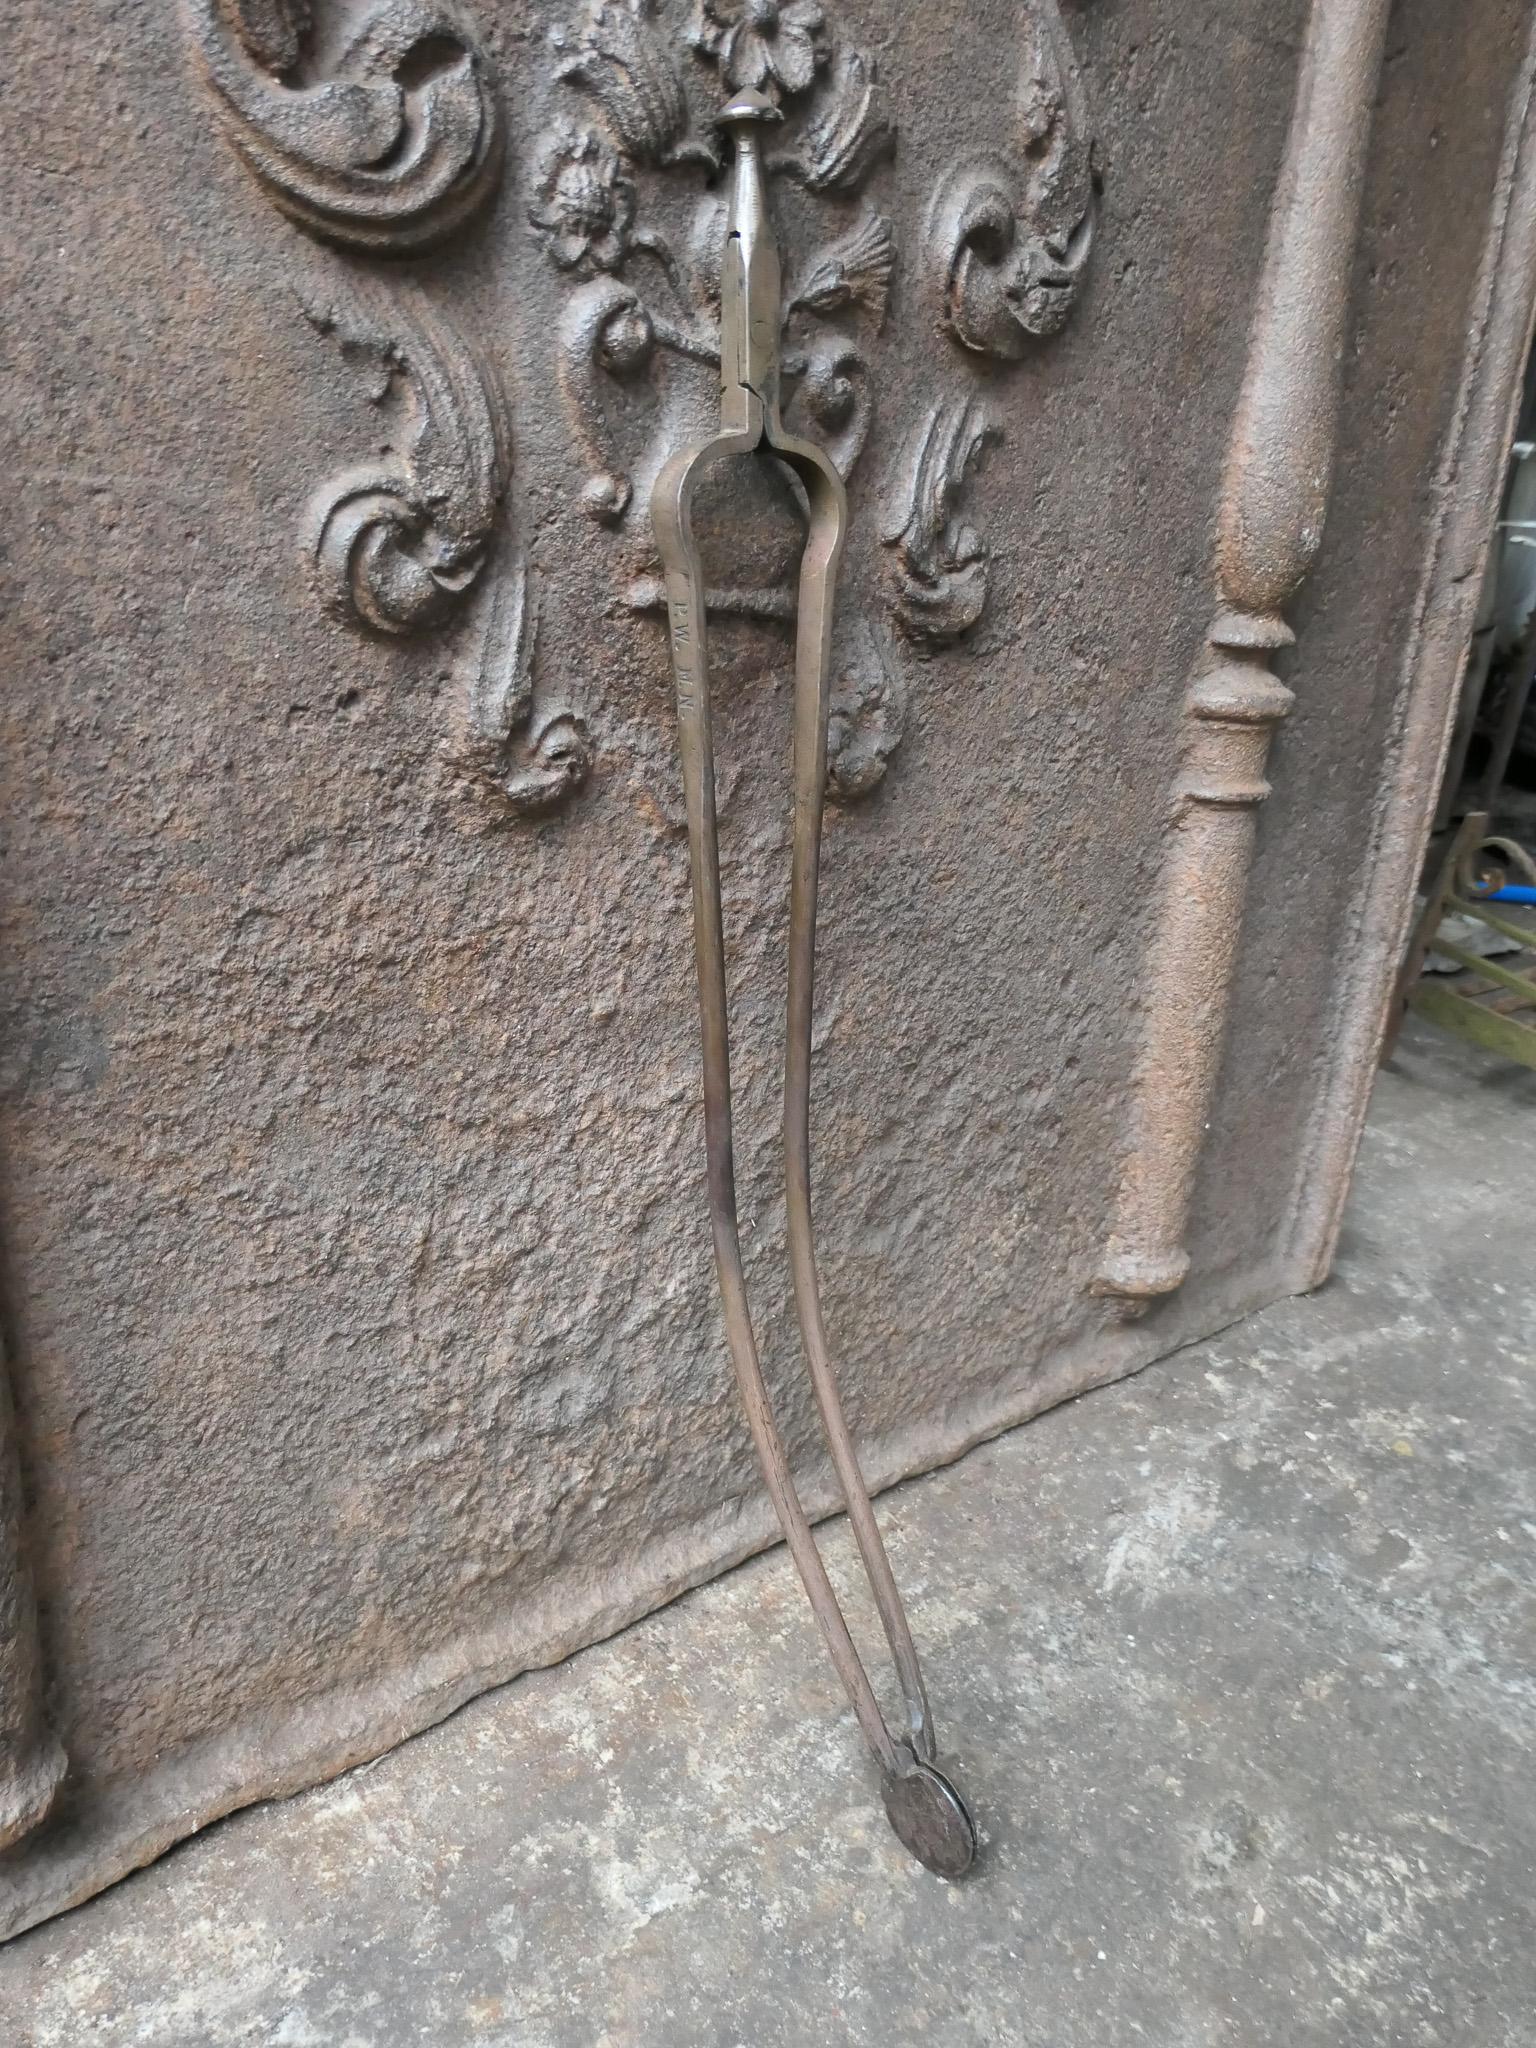 20th century Dutch Victorian style fireplace tongs made of wrought iron. The fire tongs are in a good condition and are fully functional.